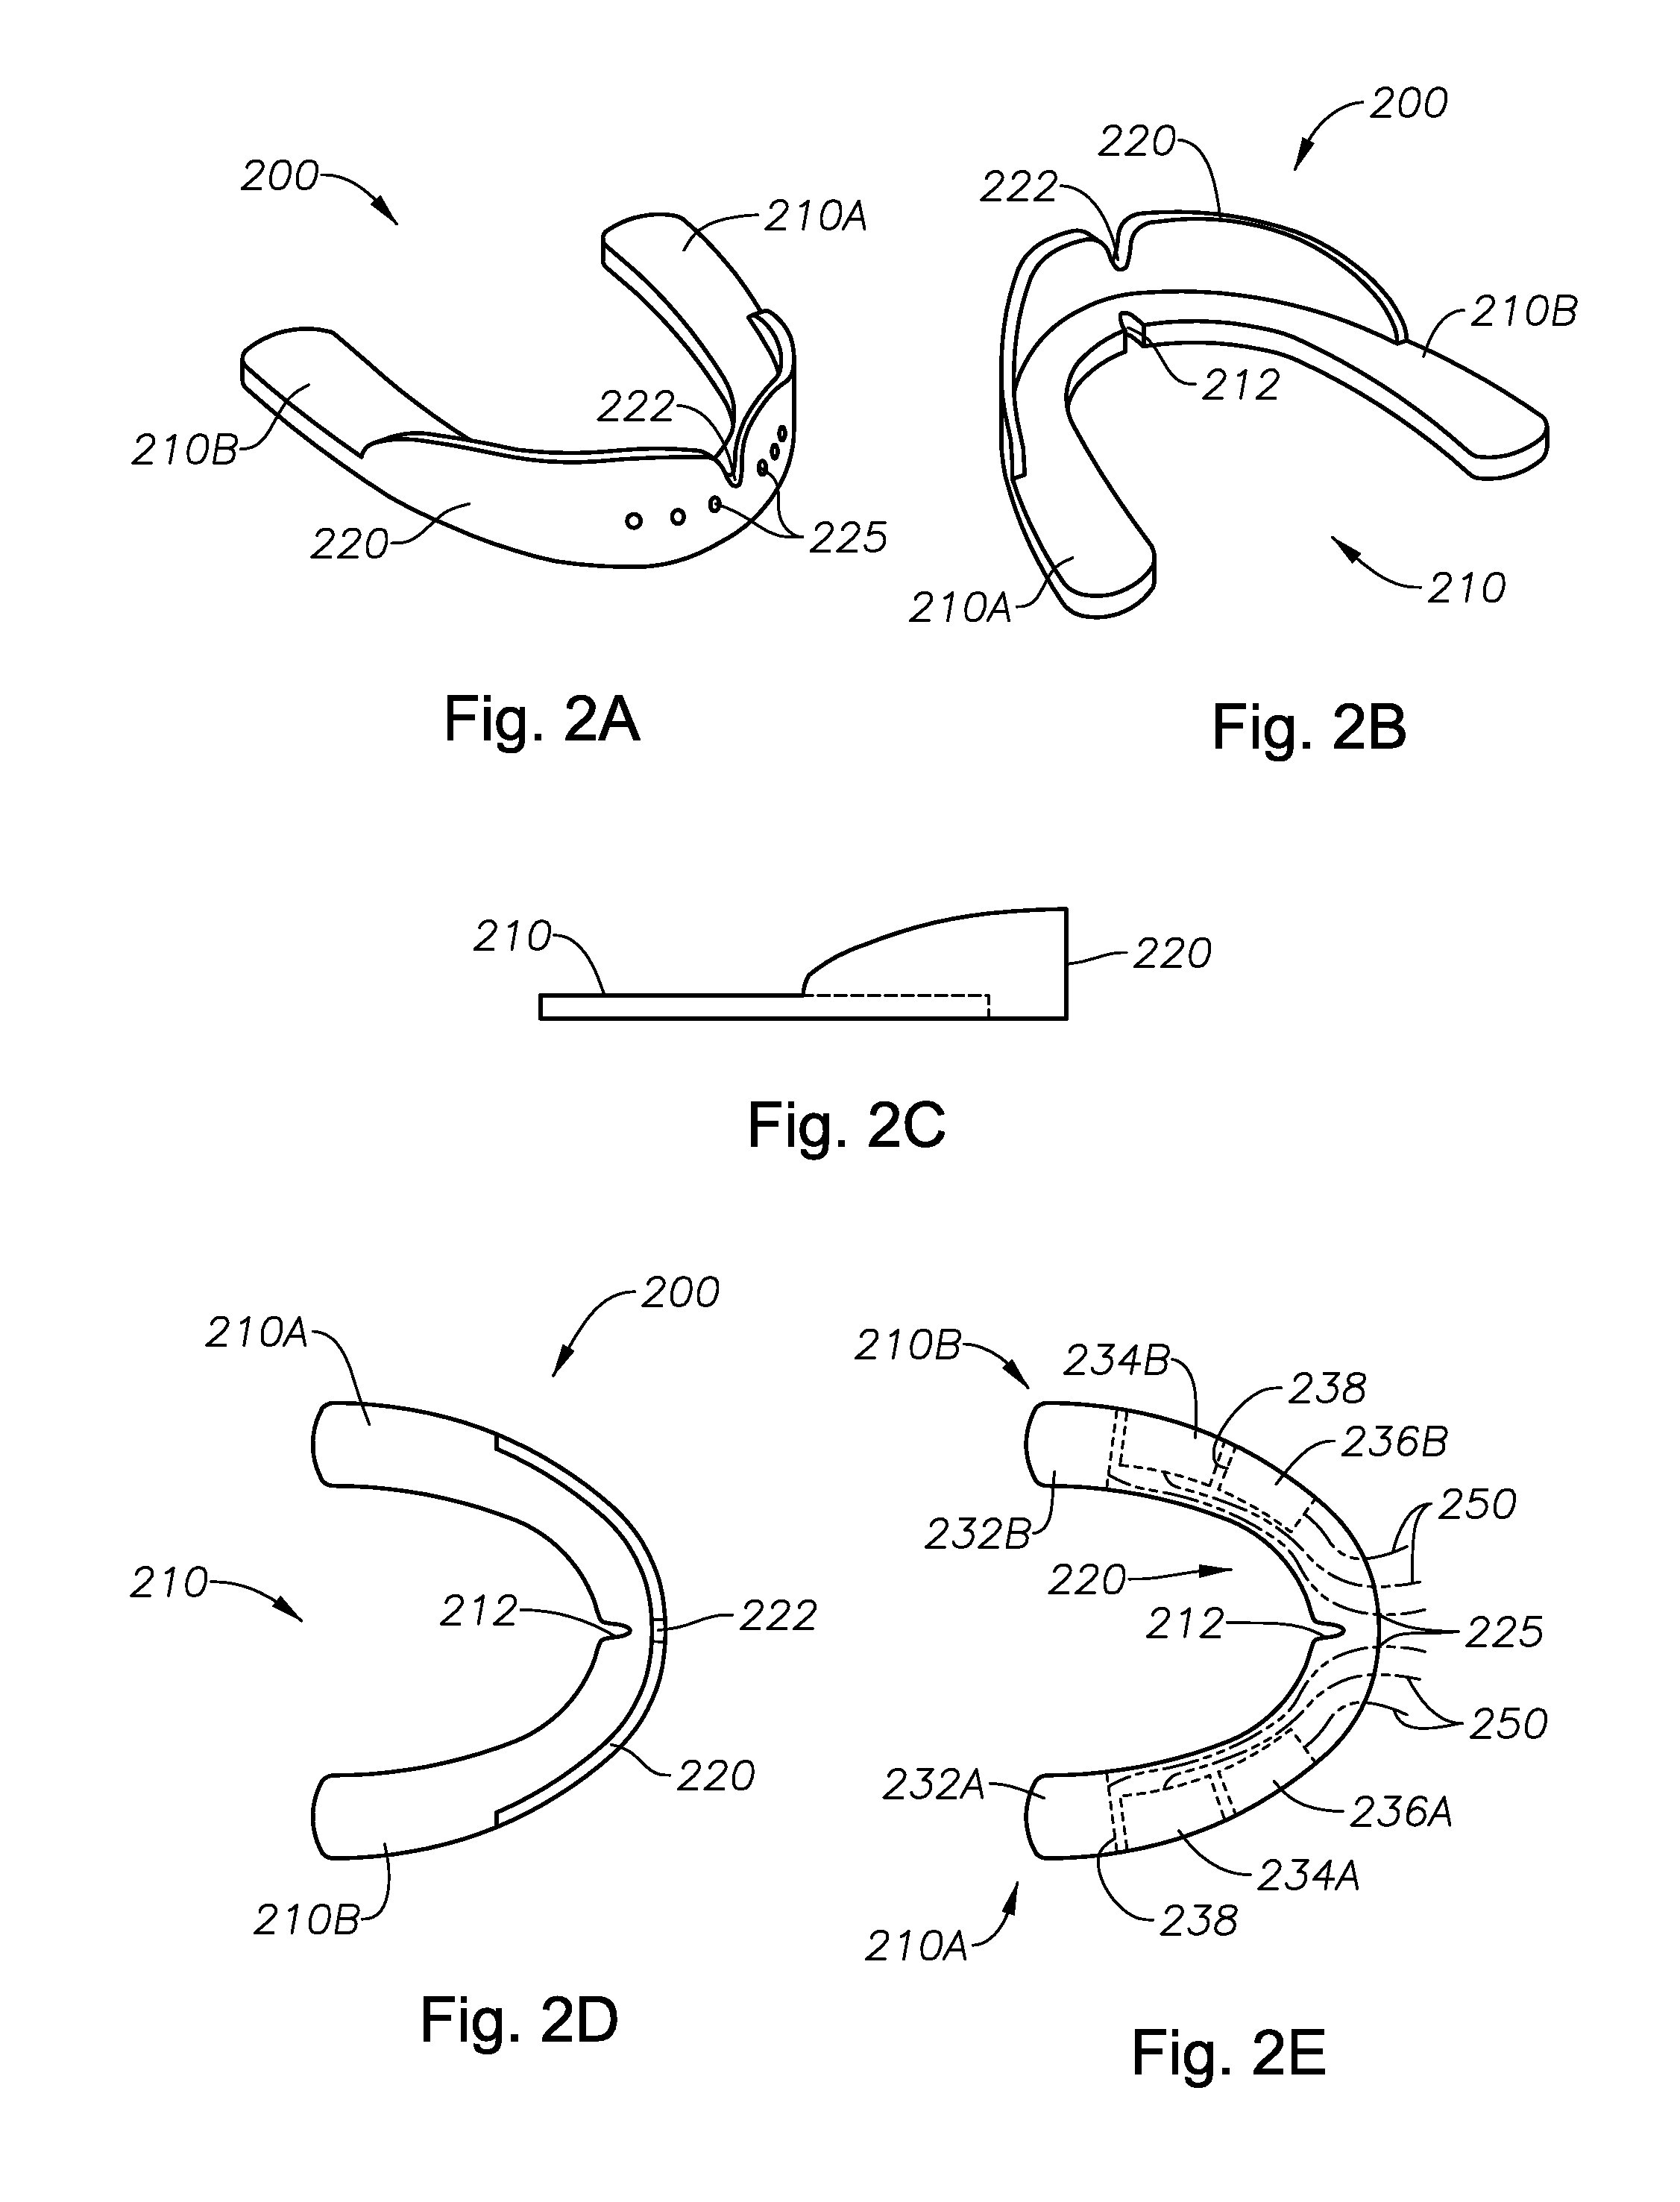 Mouth Guard for Detecting and Monitoring Bite Pressures